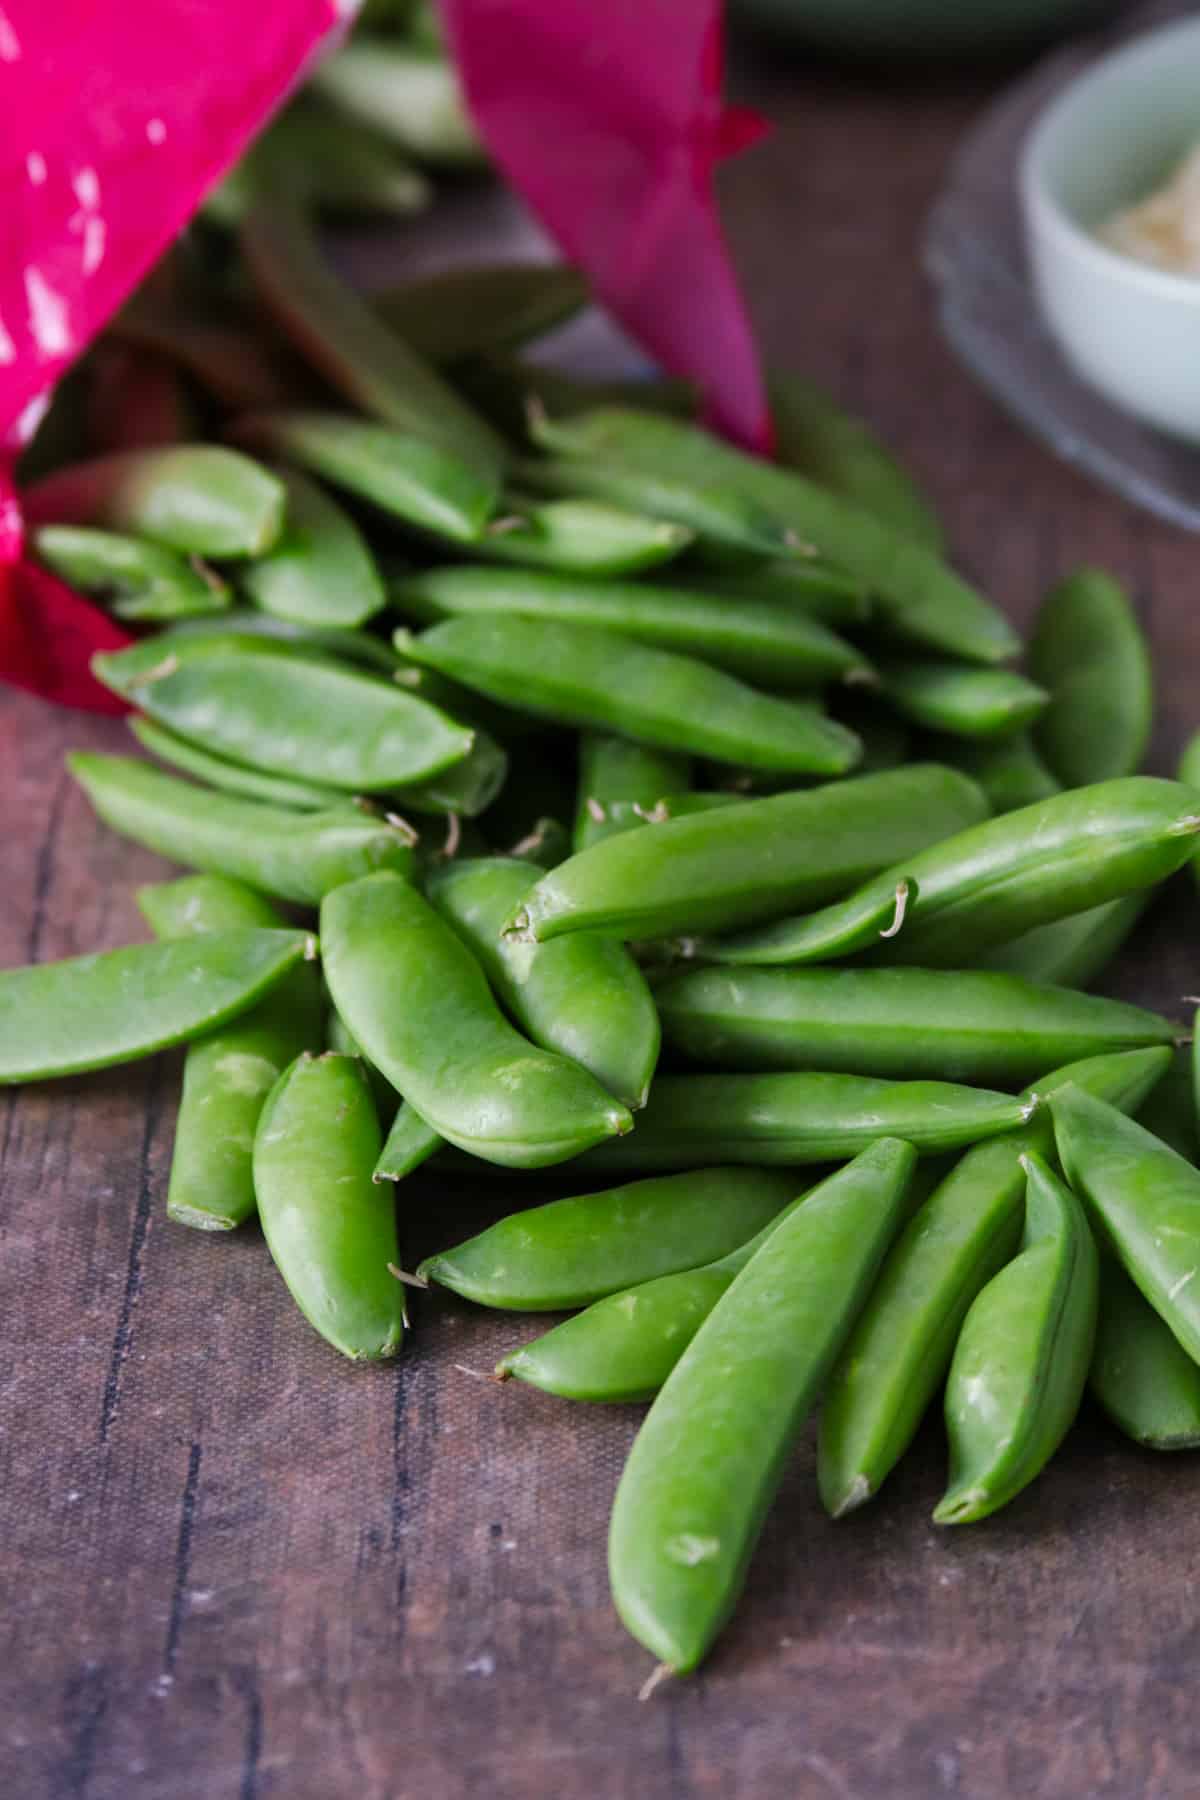 Sugar Snap peas out of a bag.